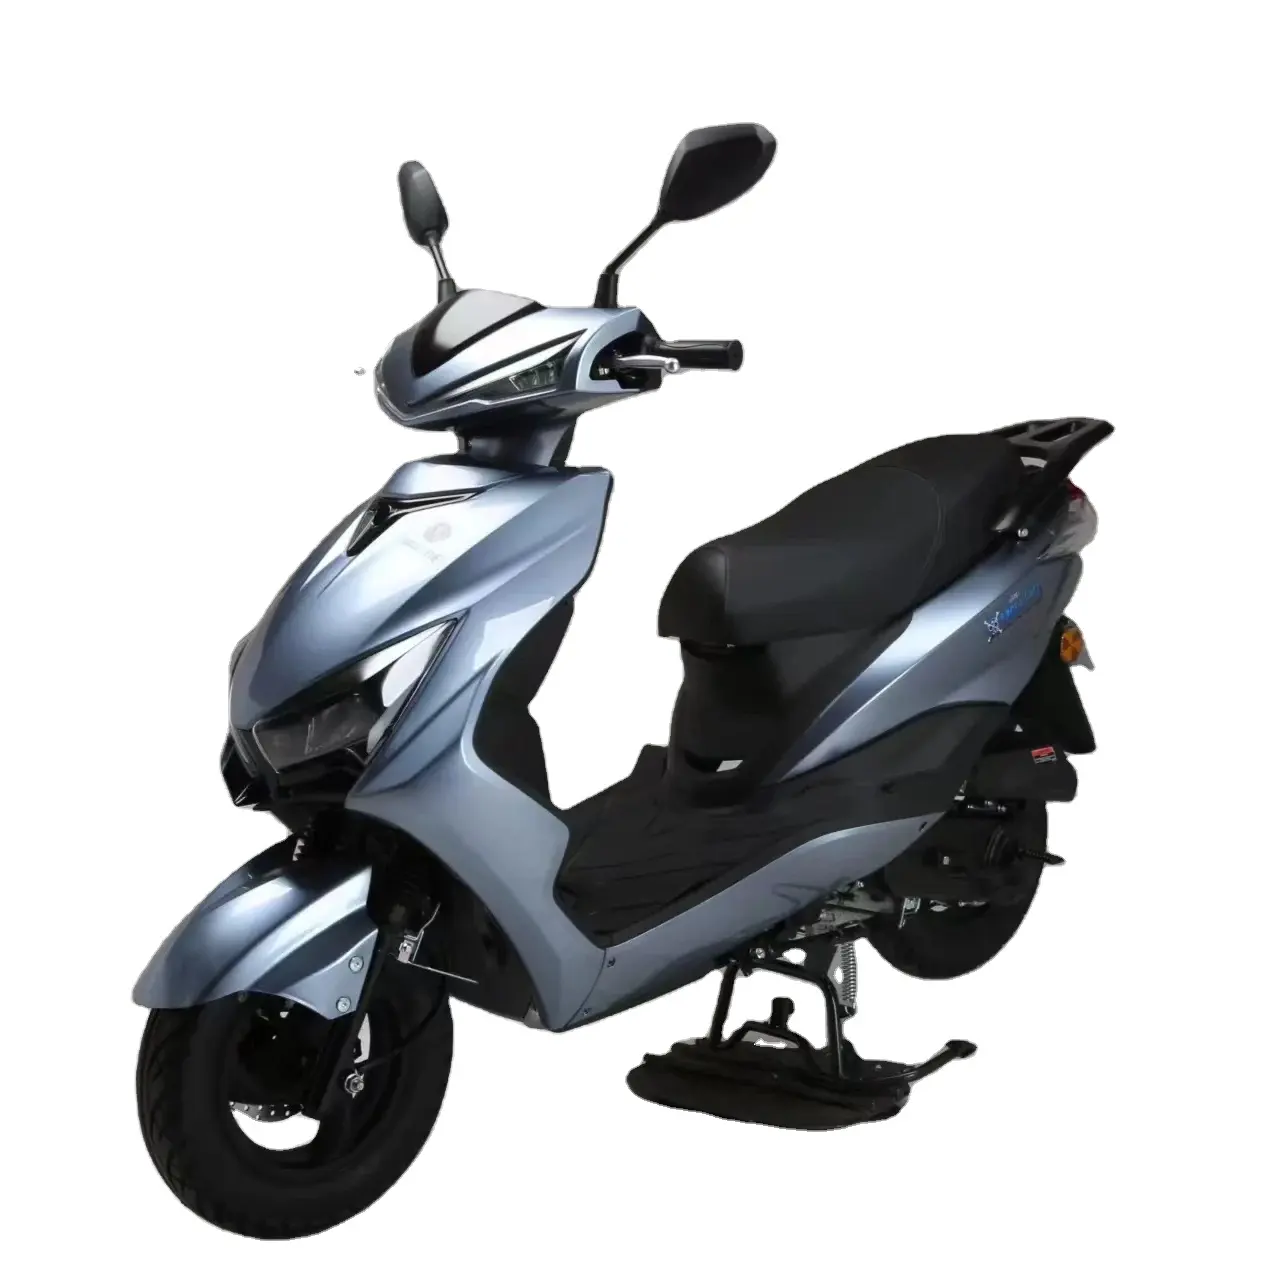 50cc Gasoline Scooter 80cc Gas Moped Gasoline Scooter 150cc Motorcycles For Sale